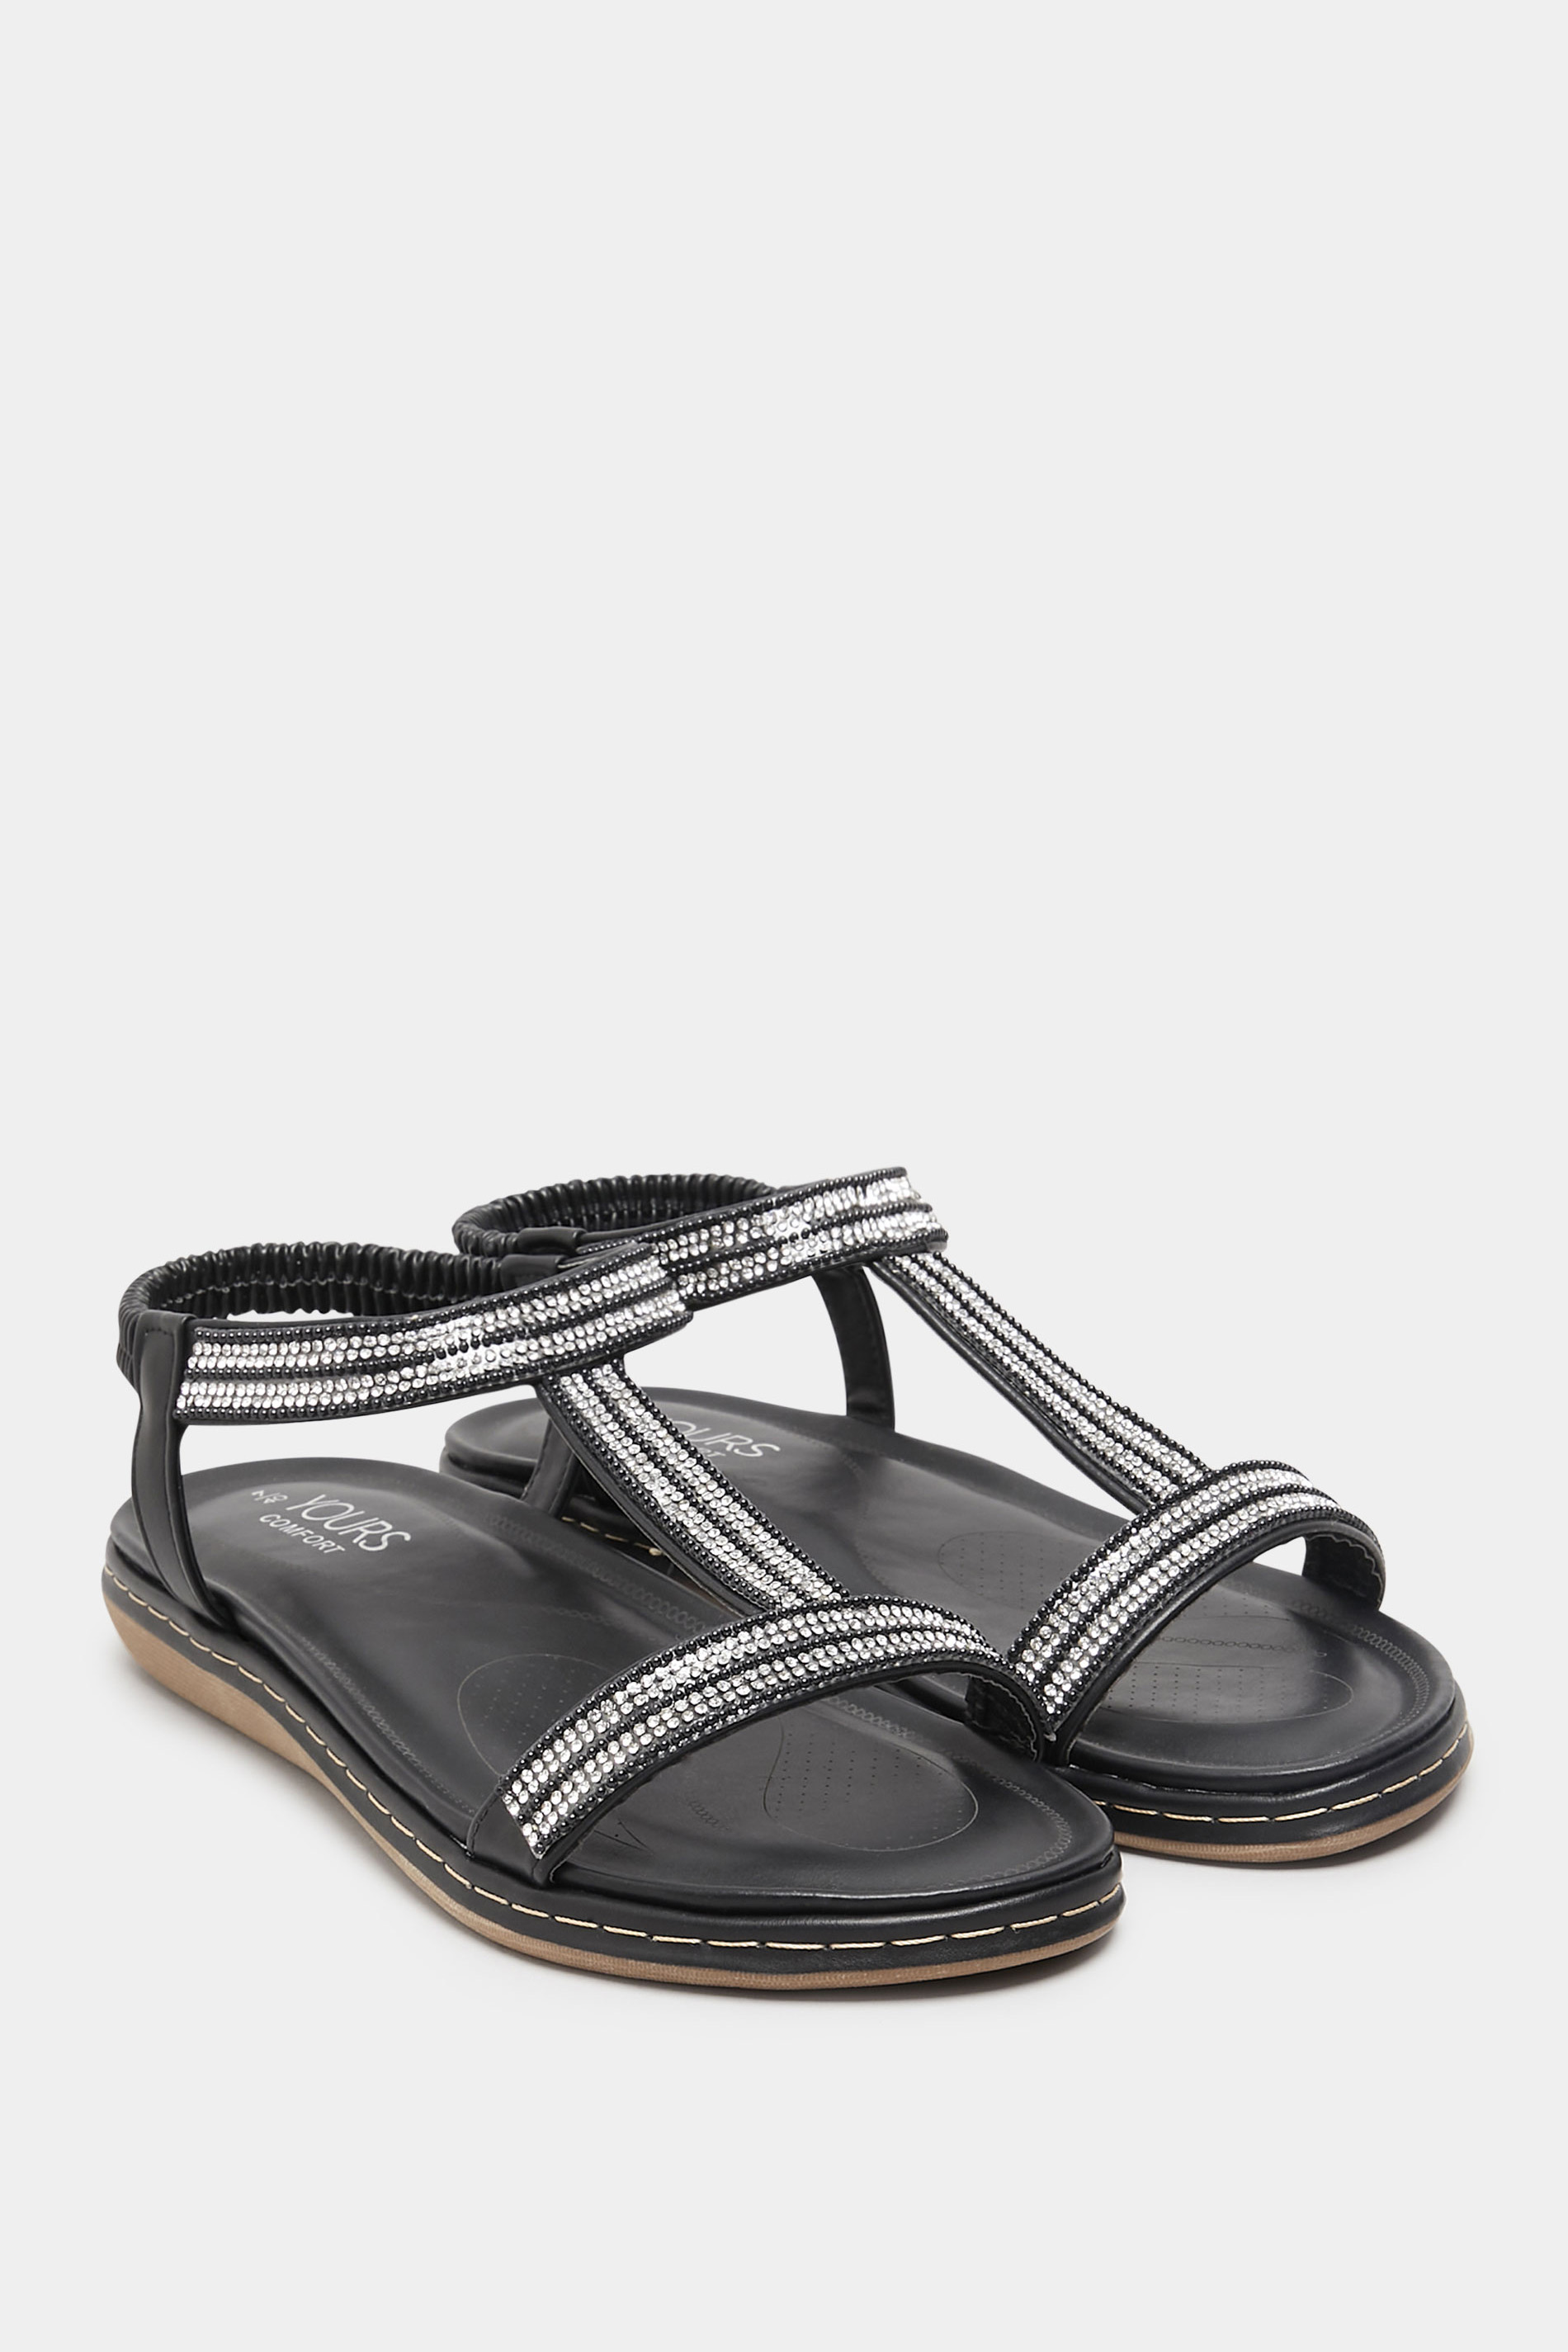 Plus Size Black Diamante Strap Sandals In Extra Wide Fit | Yours Clothing 2